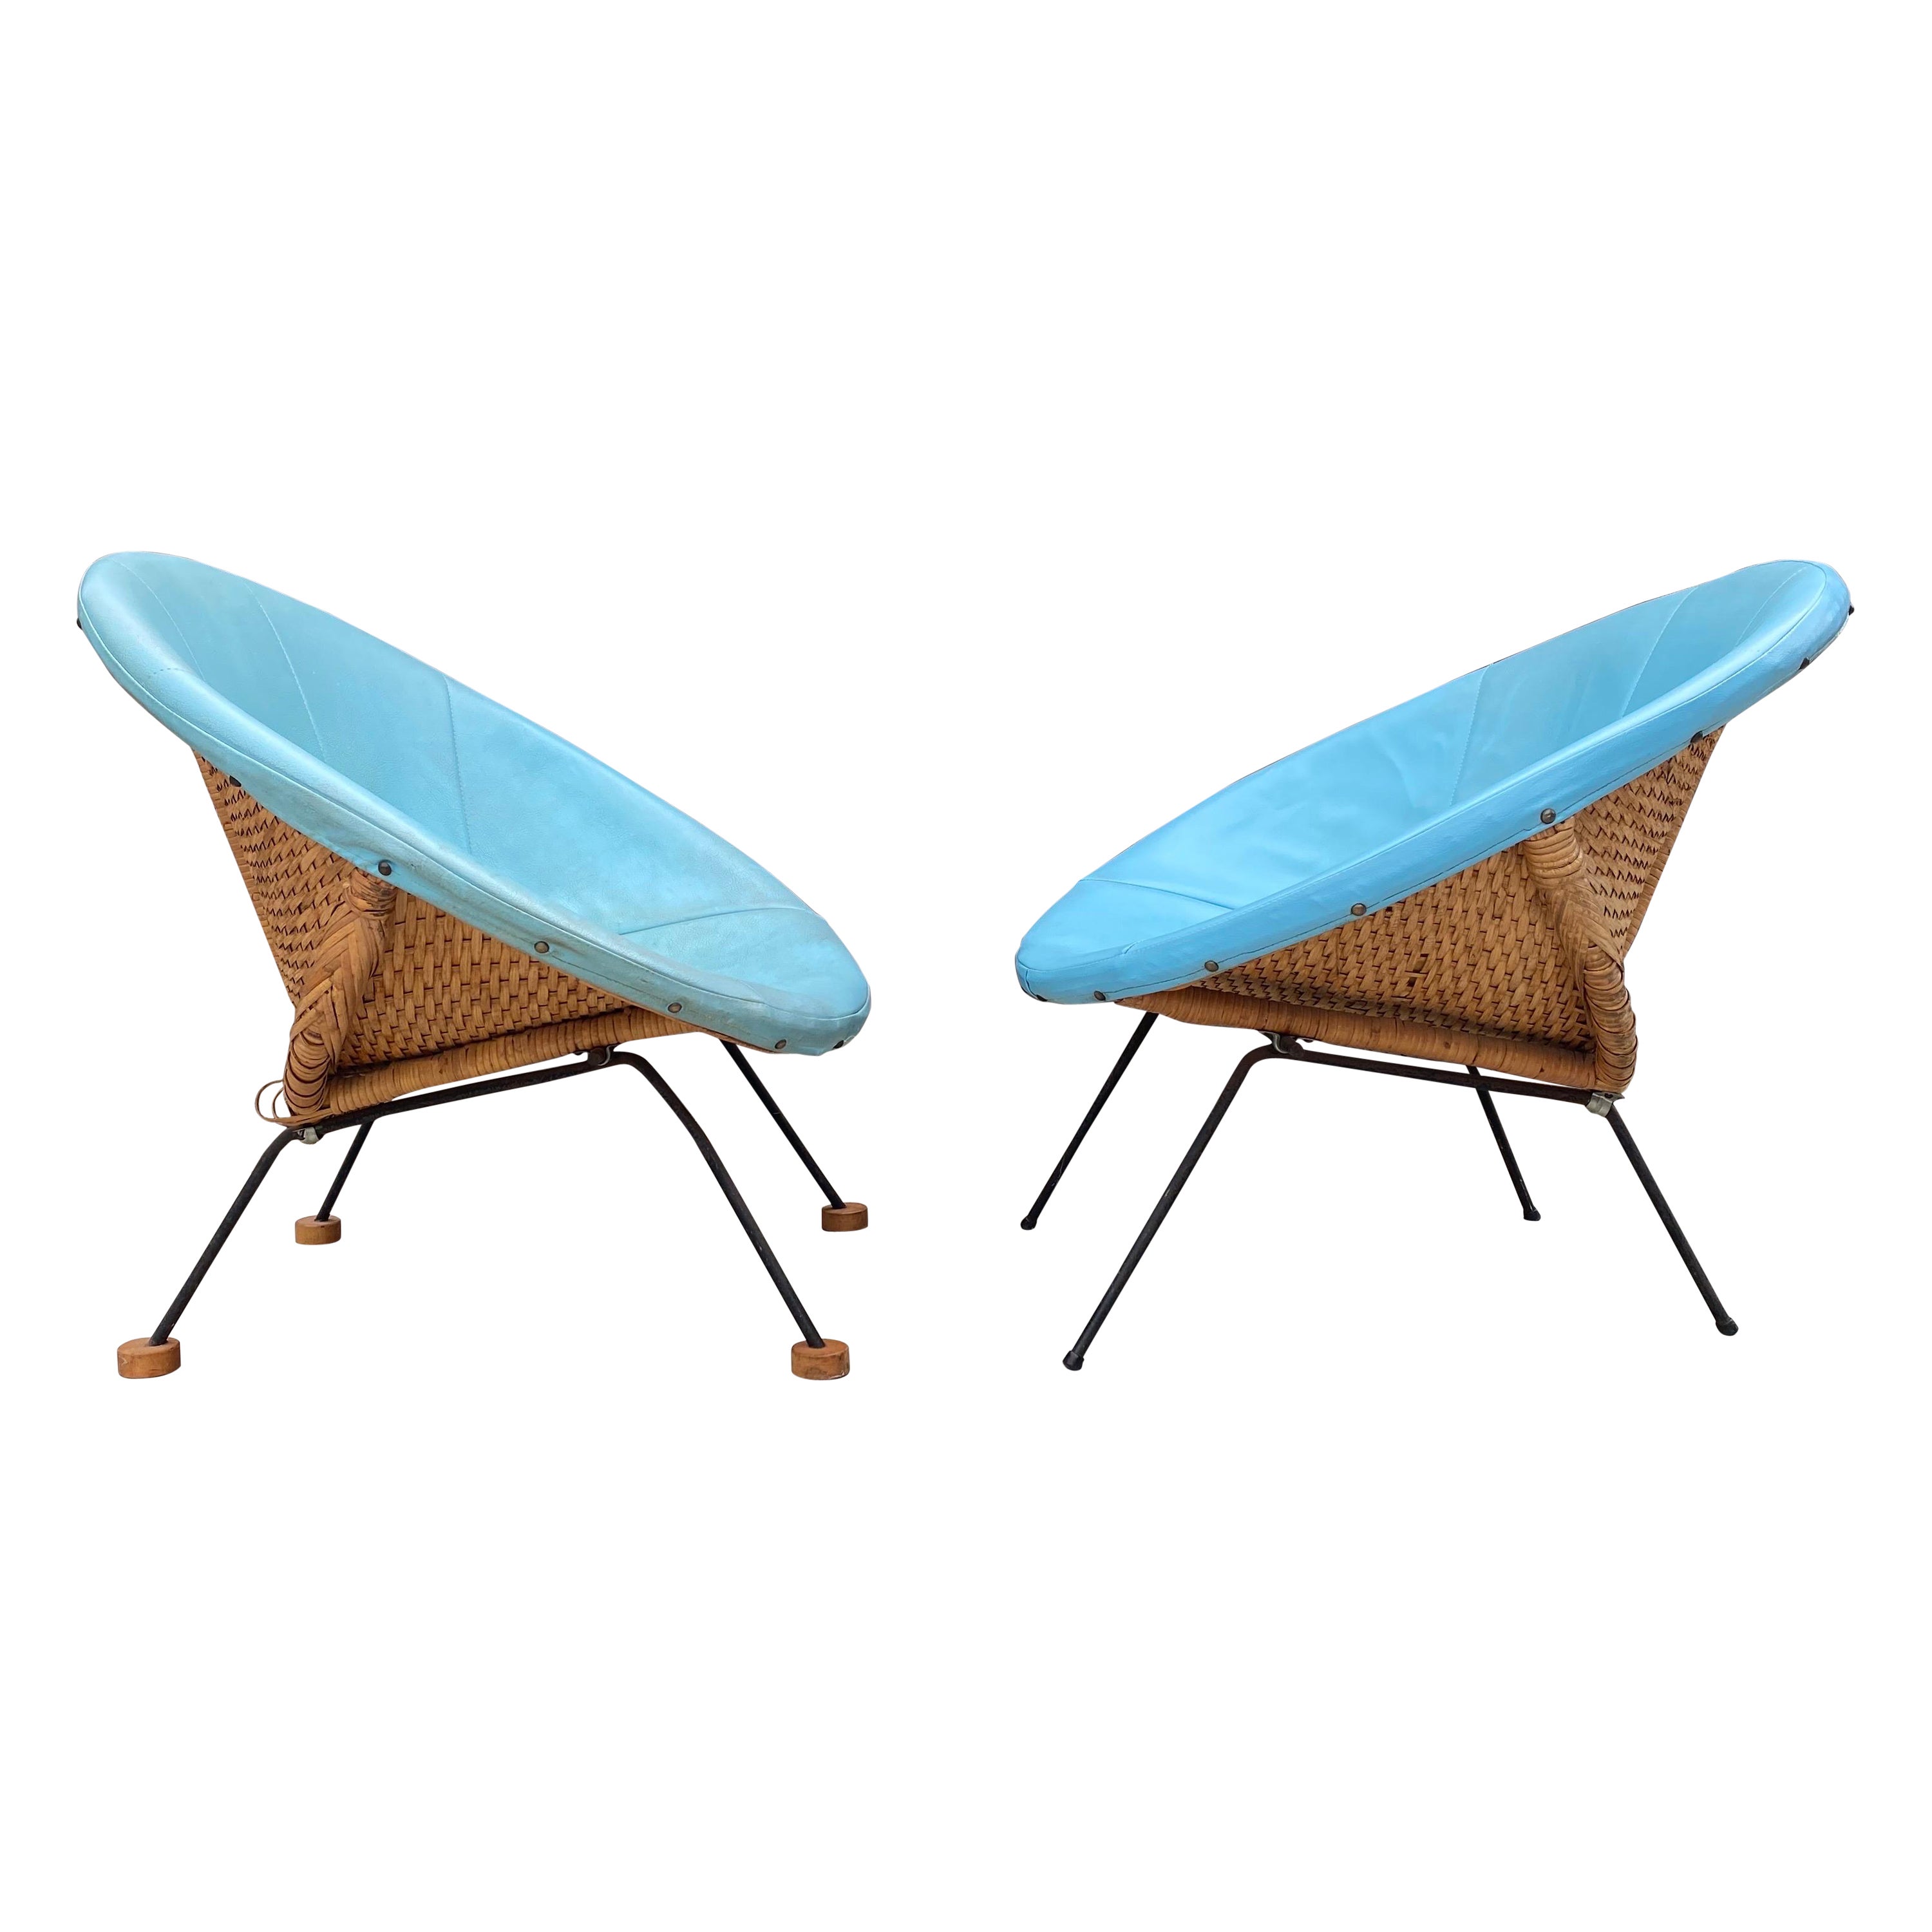 Paire de chaises Scoop en rotin turquoise, The Moderns Moderns, Boho Chic